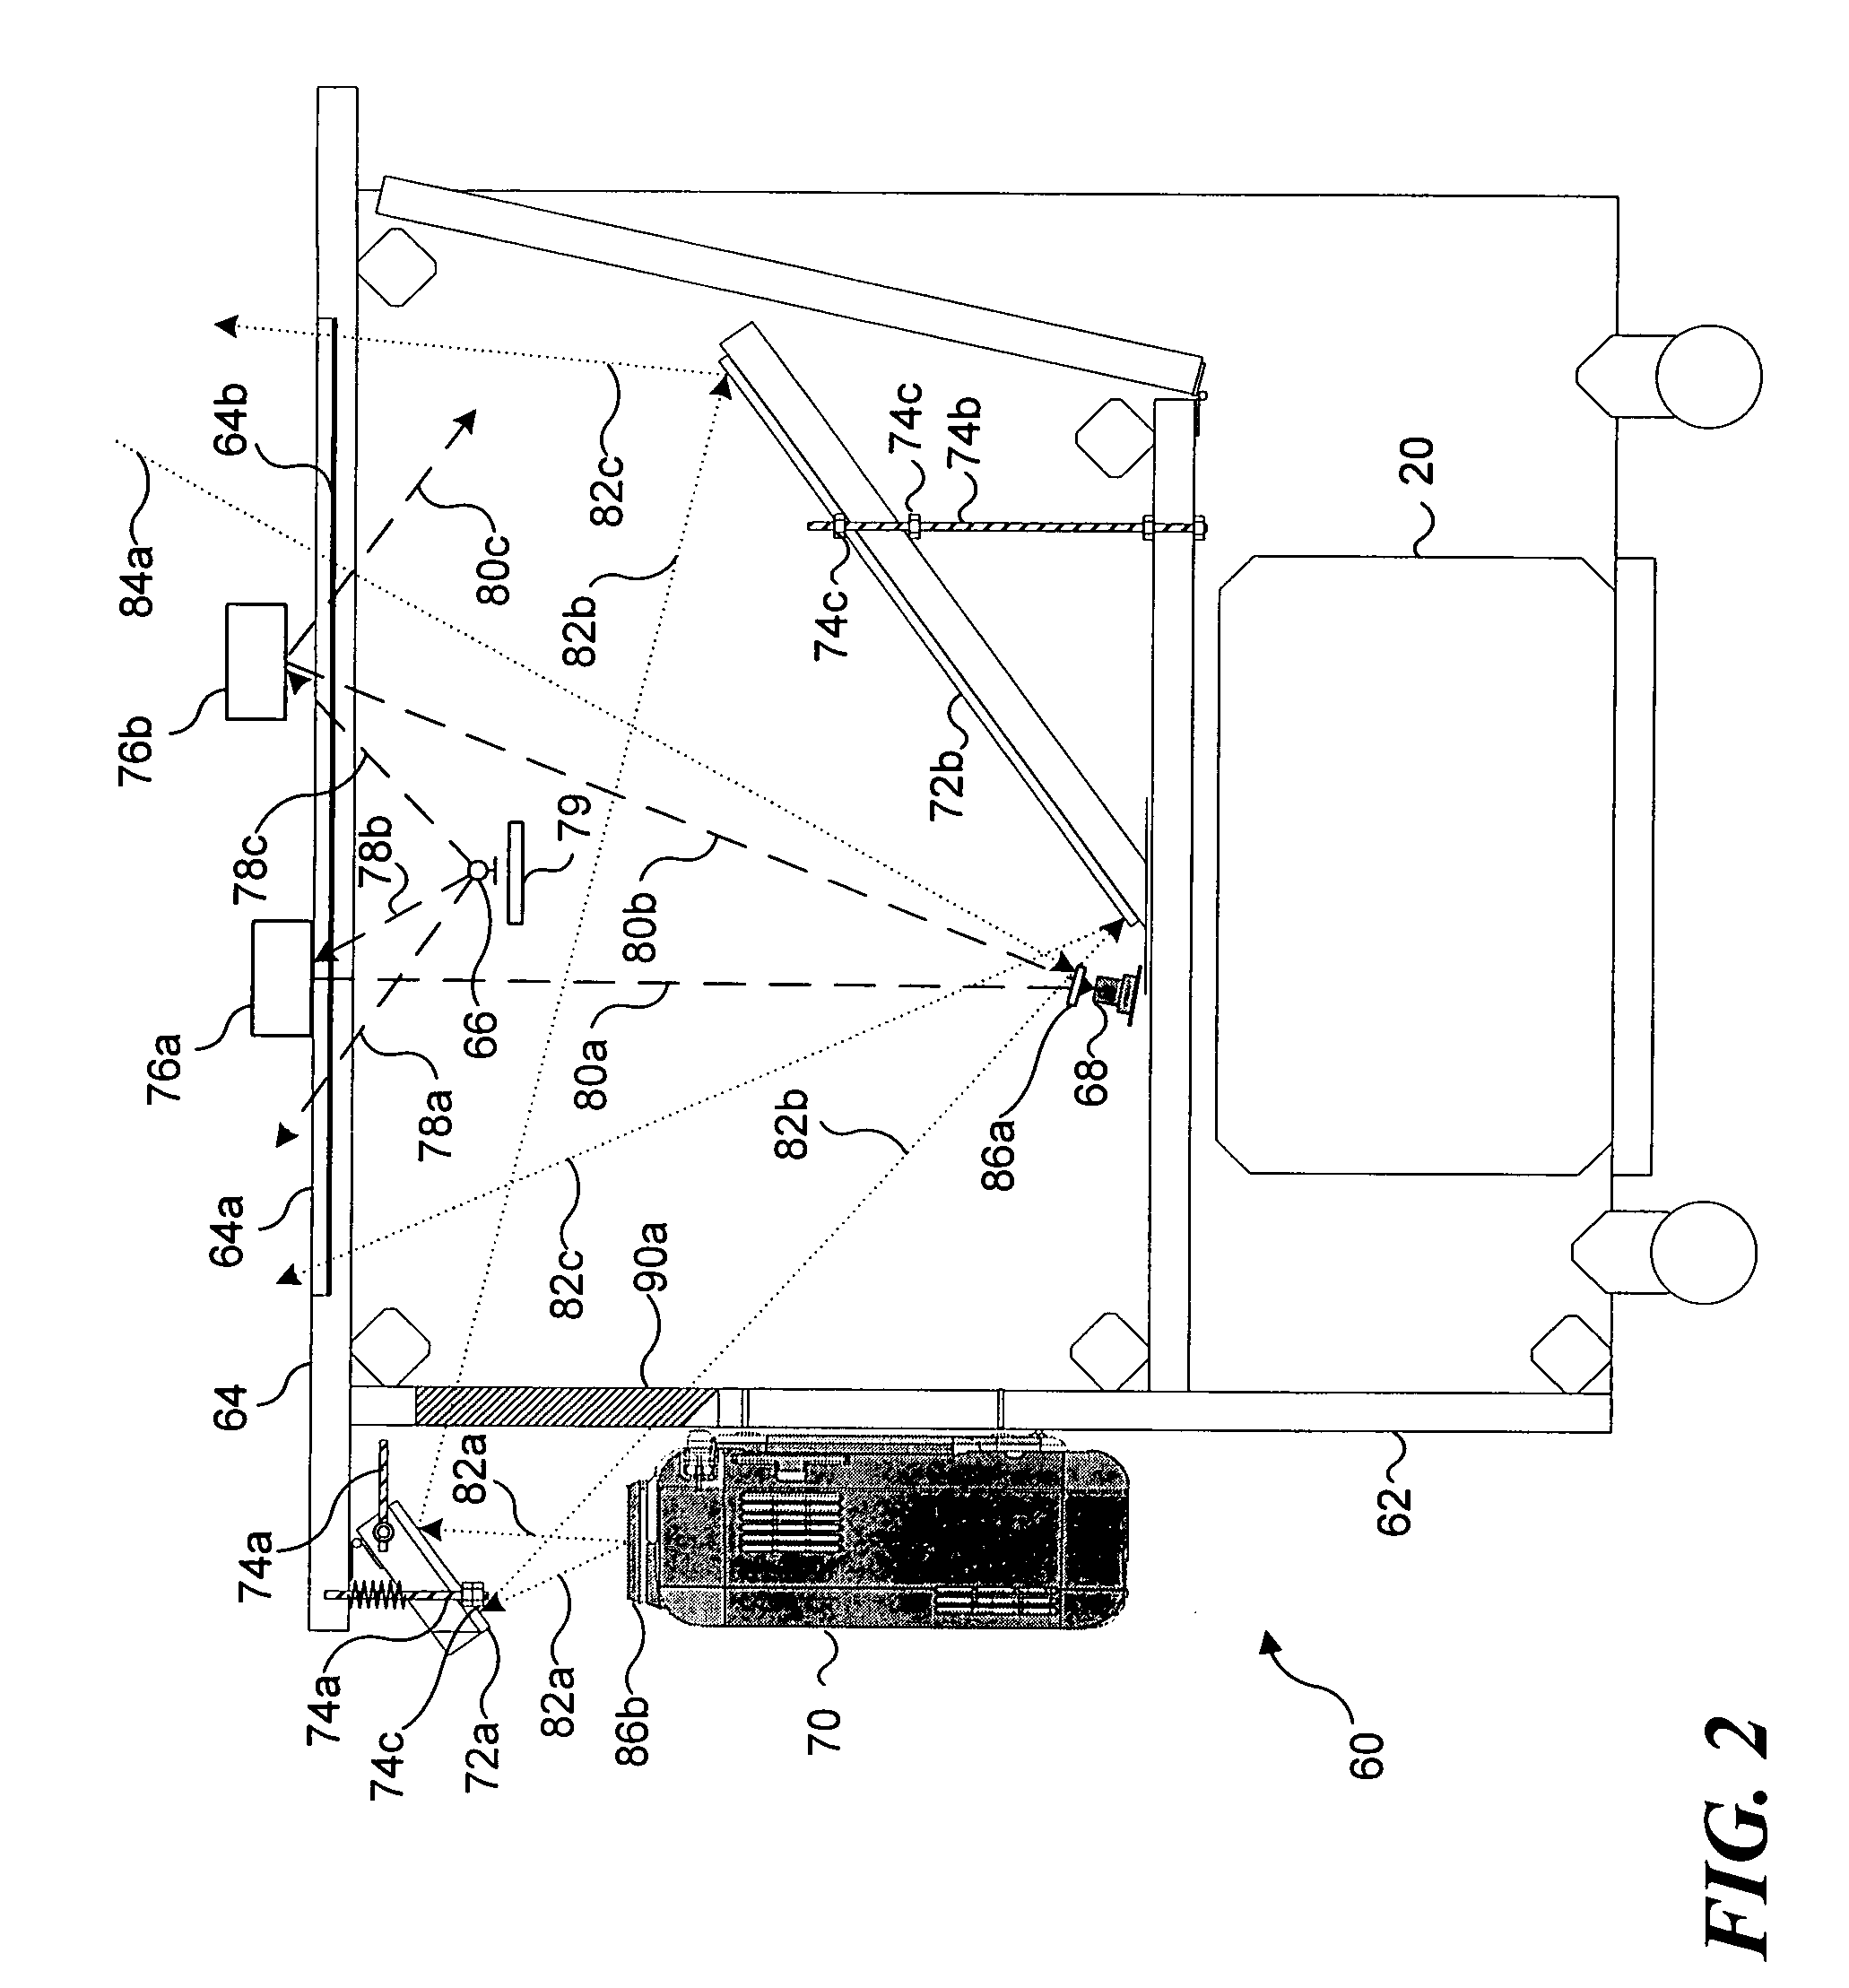 Associating application states with a physical object